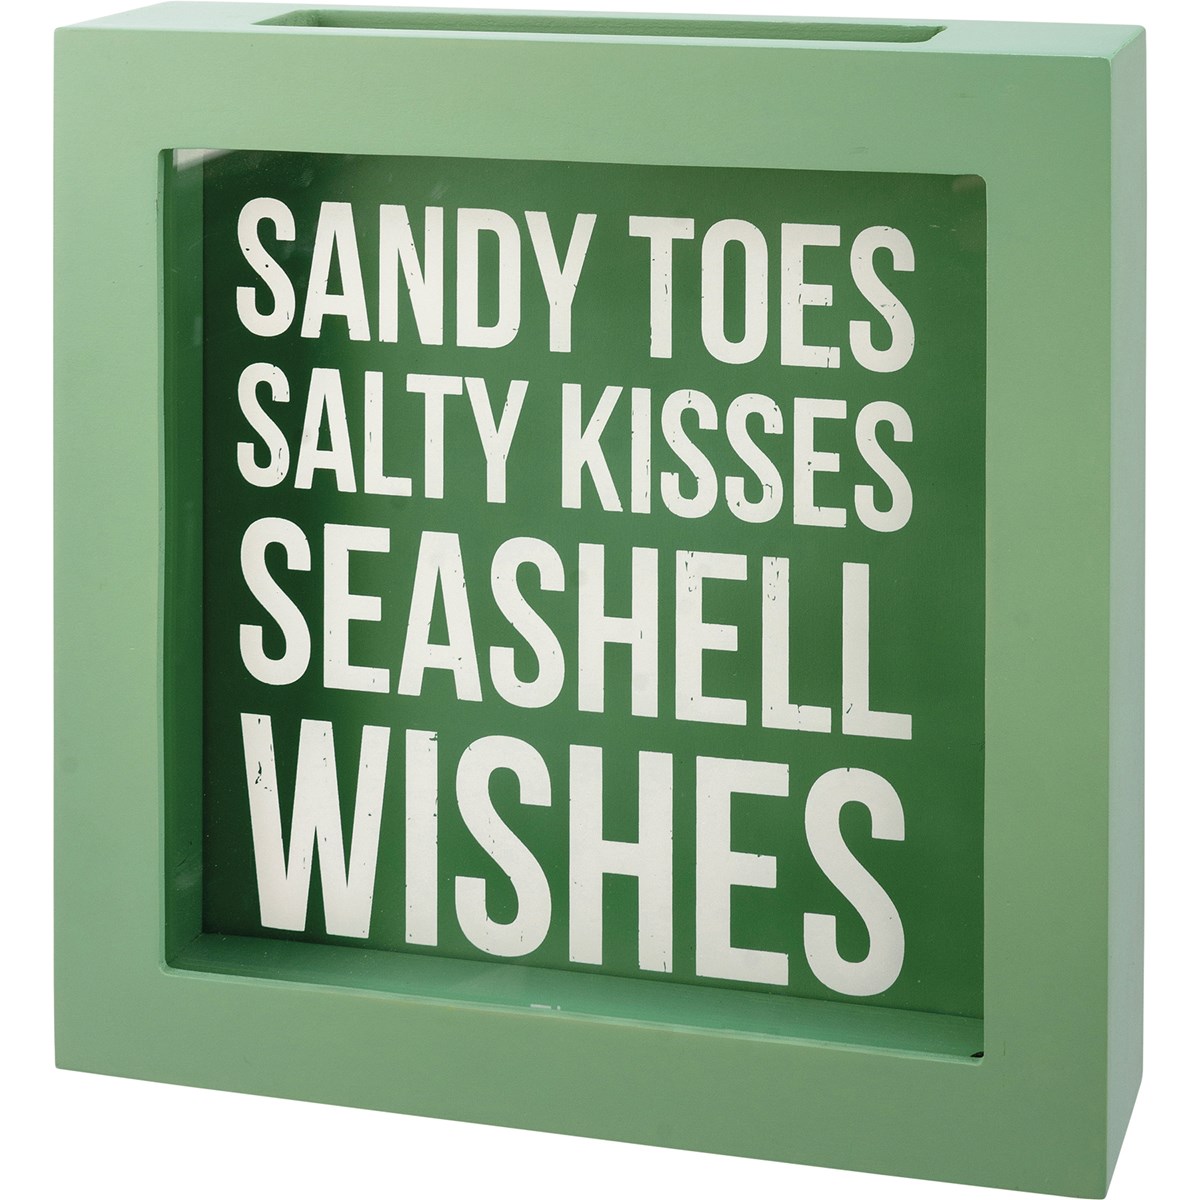 Shell Holder - Sandy Toes Seashell Wishes - 10" x 10" x 2.50" - Wood, Glass